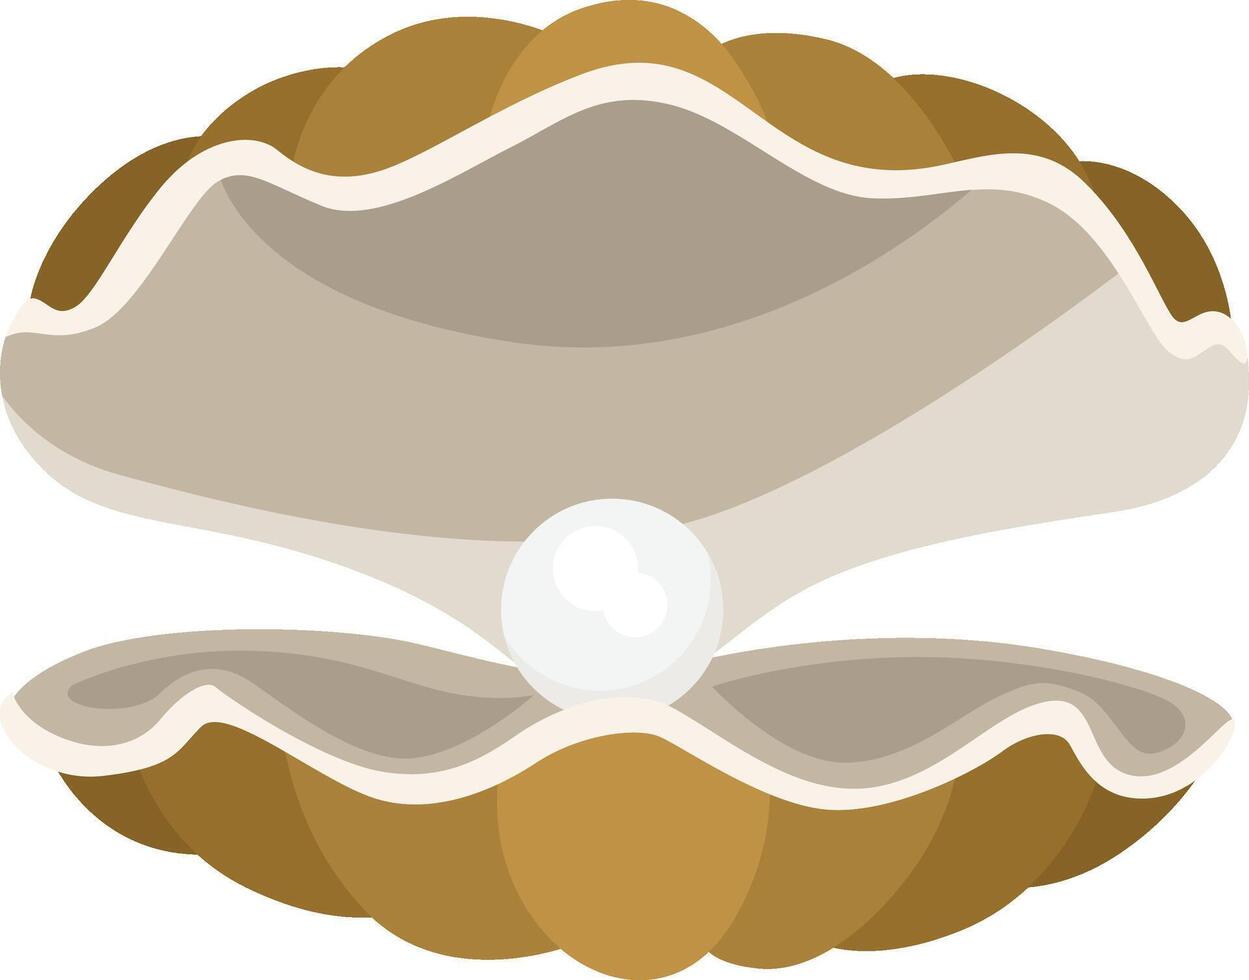 Sea clam shell with pearl vector